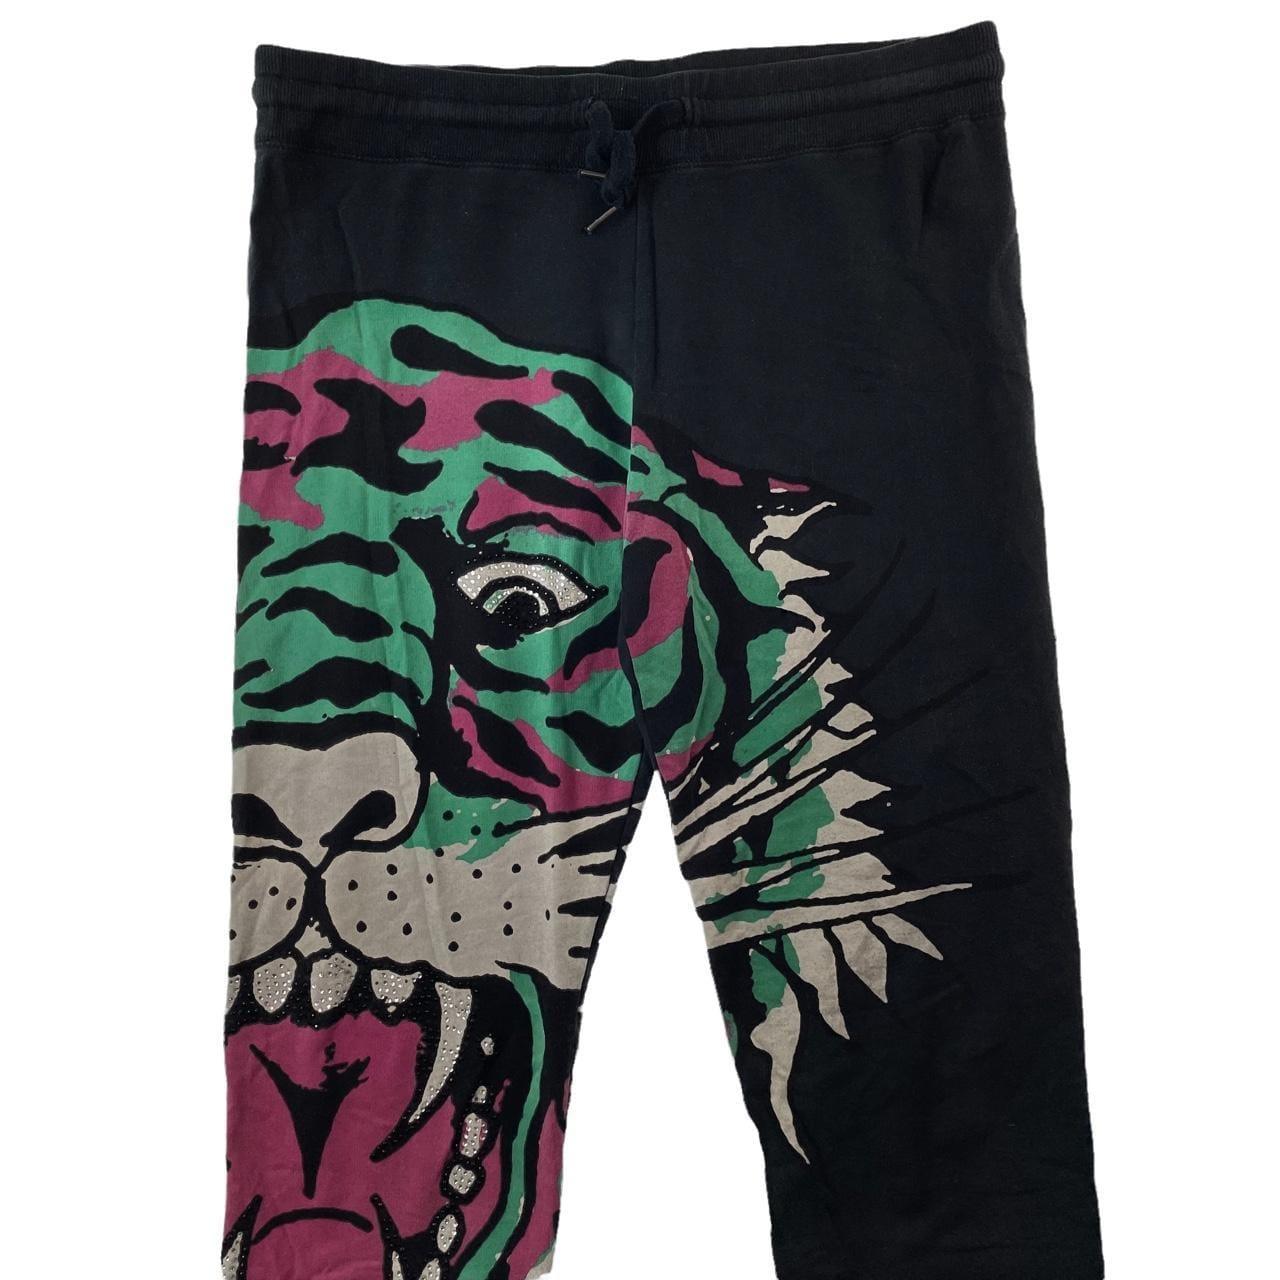 Vintage Ed Hardy tiger joggers trousers size M - Known Source